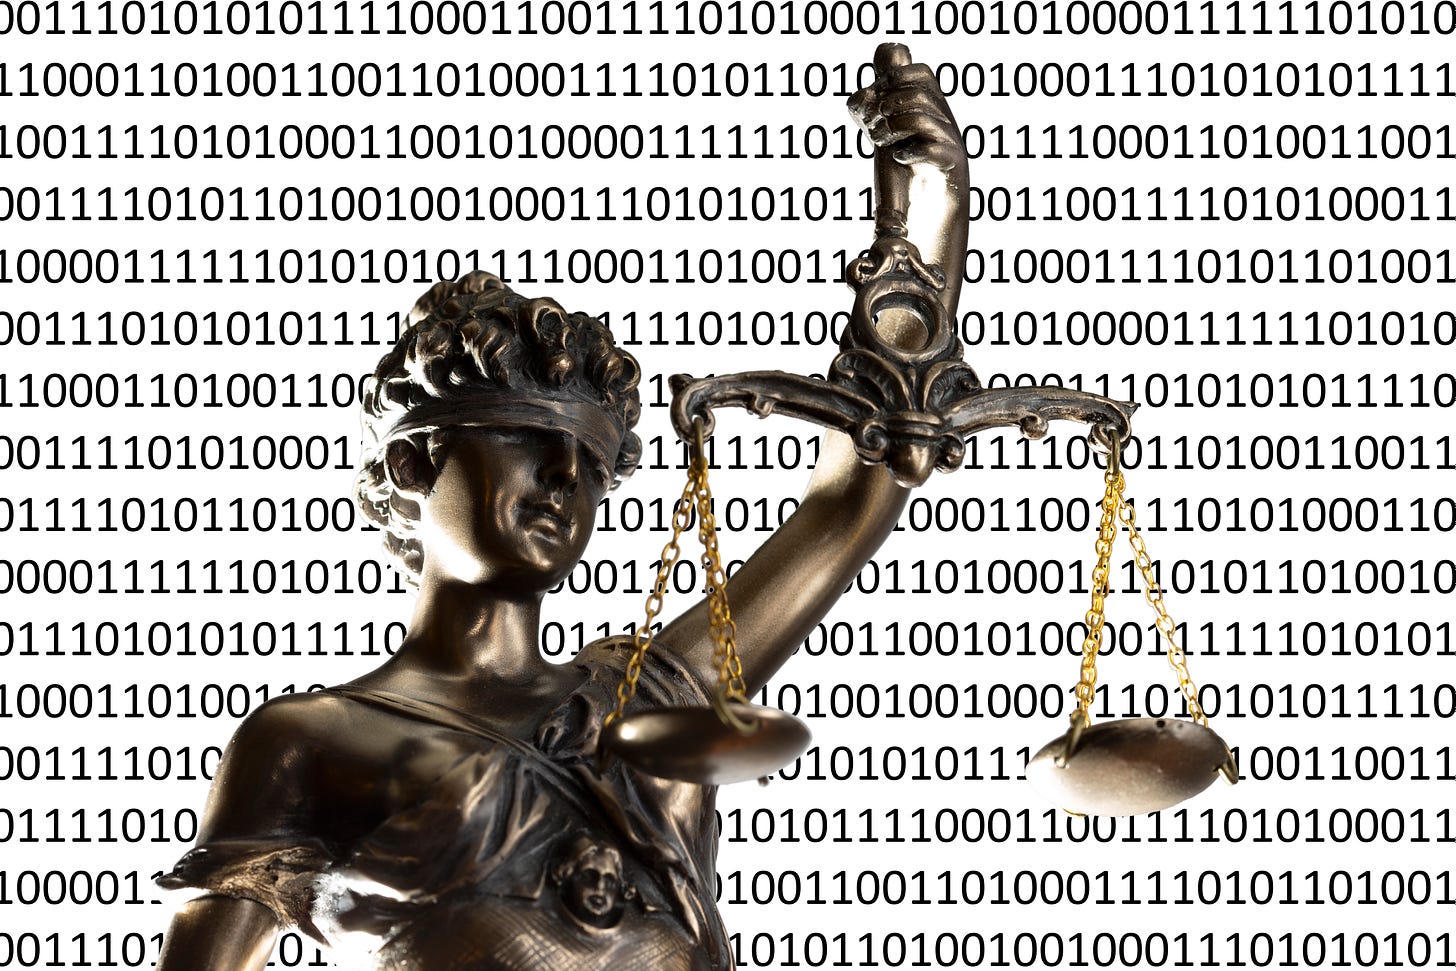 Statue of blindfolded Lady Justice overlayed on binary code.